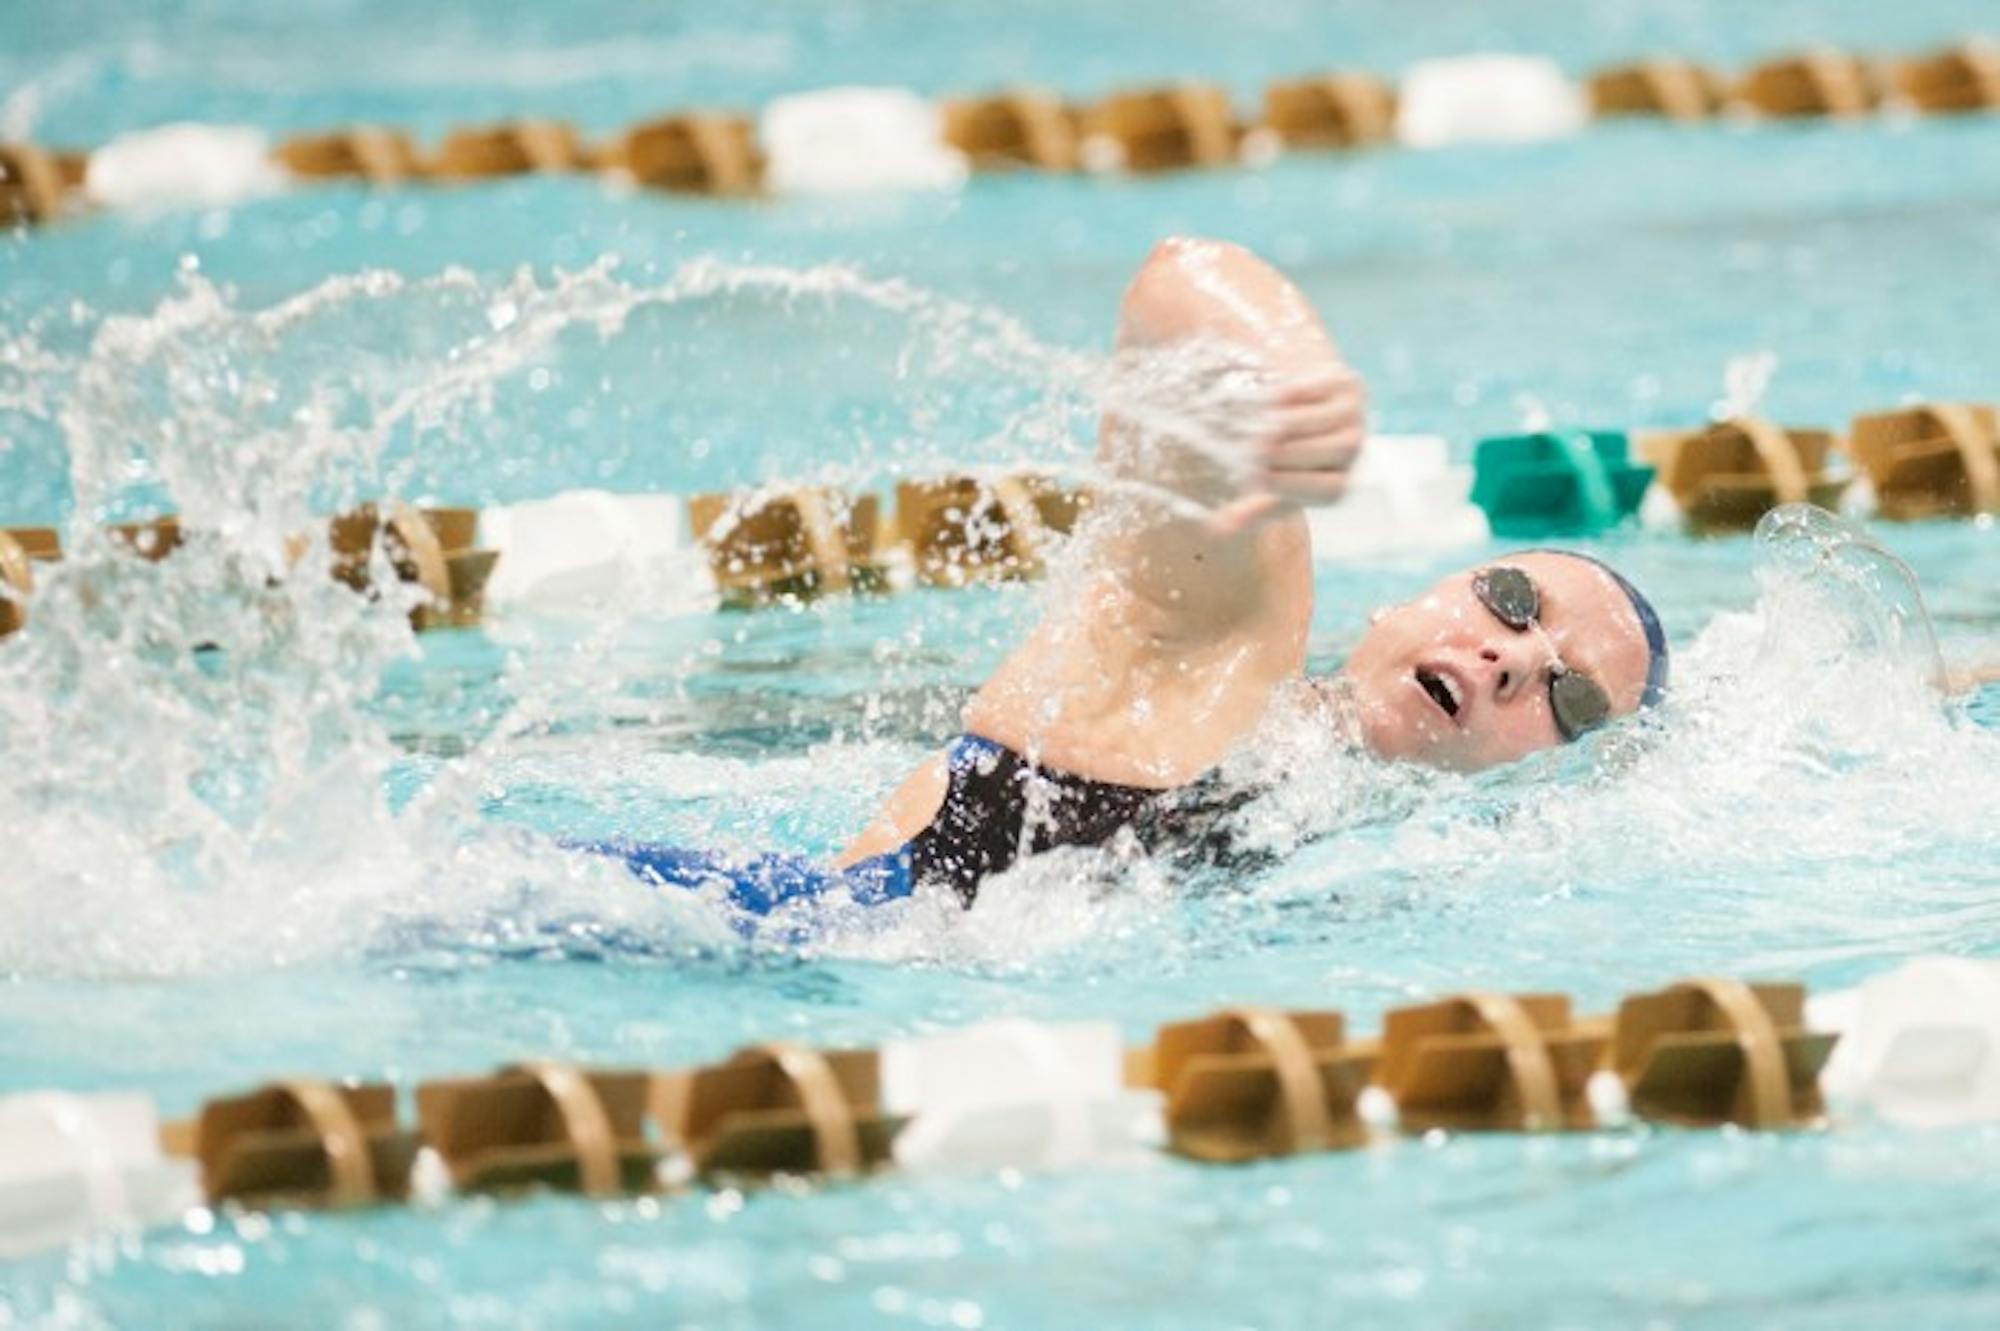 Irish senior Emma Reaney swims in the freestyle portion of the 200-yard individual medley during the Shamrock Invitational on Jan. 31, 2014 at Rolfs Aquatic Center. Reaney finished in a then-pool record 1:58.95 on her way to the win.